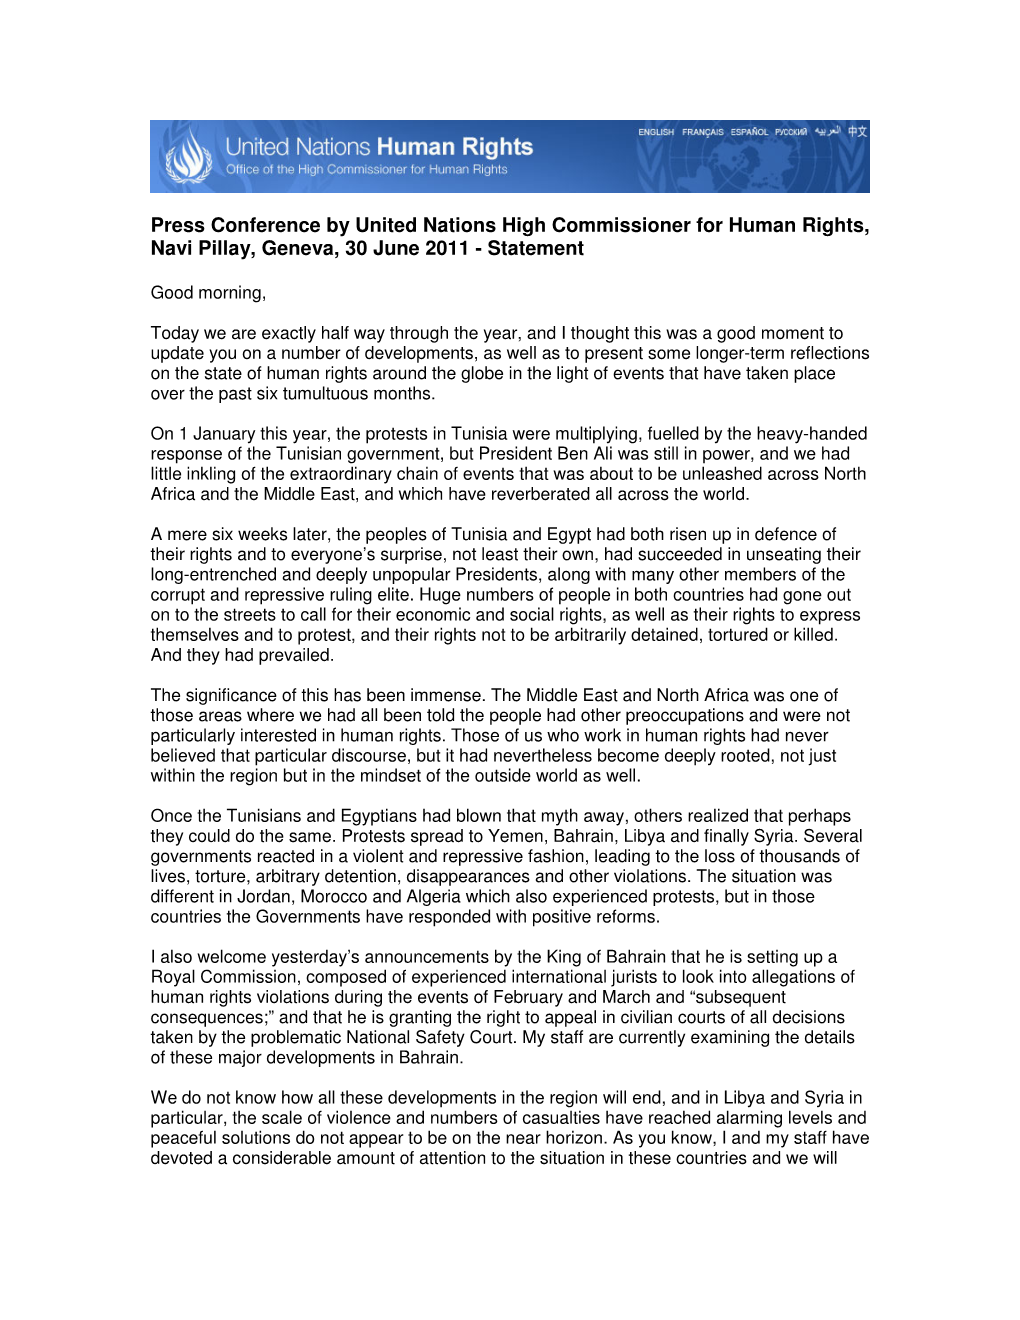 Press Conference by United Nations High Commissioner for Human Rights, Navi Pillay, Geneva, 30 June 2011 - Statement